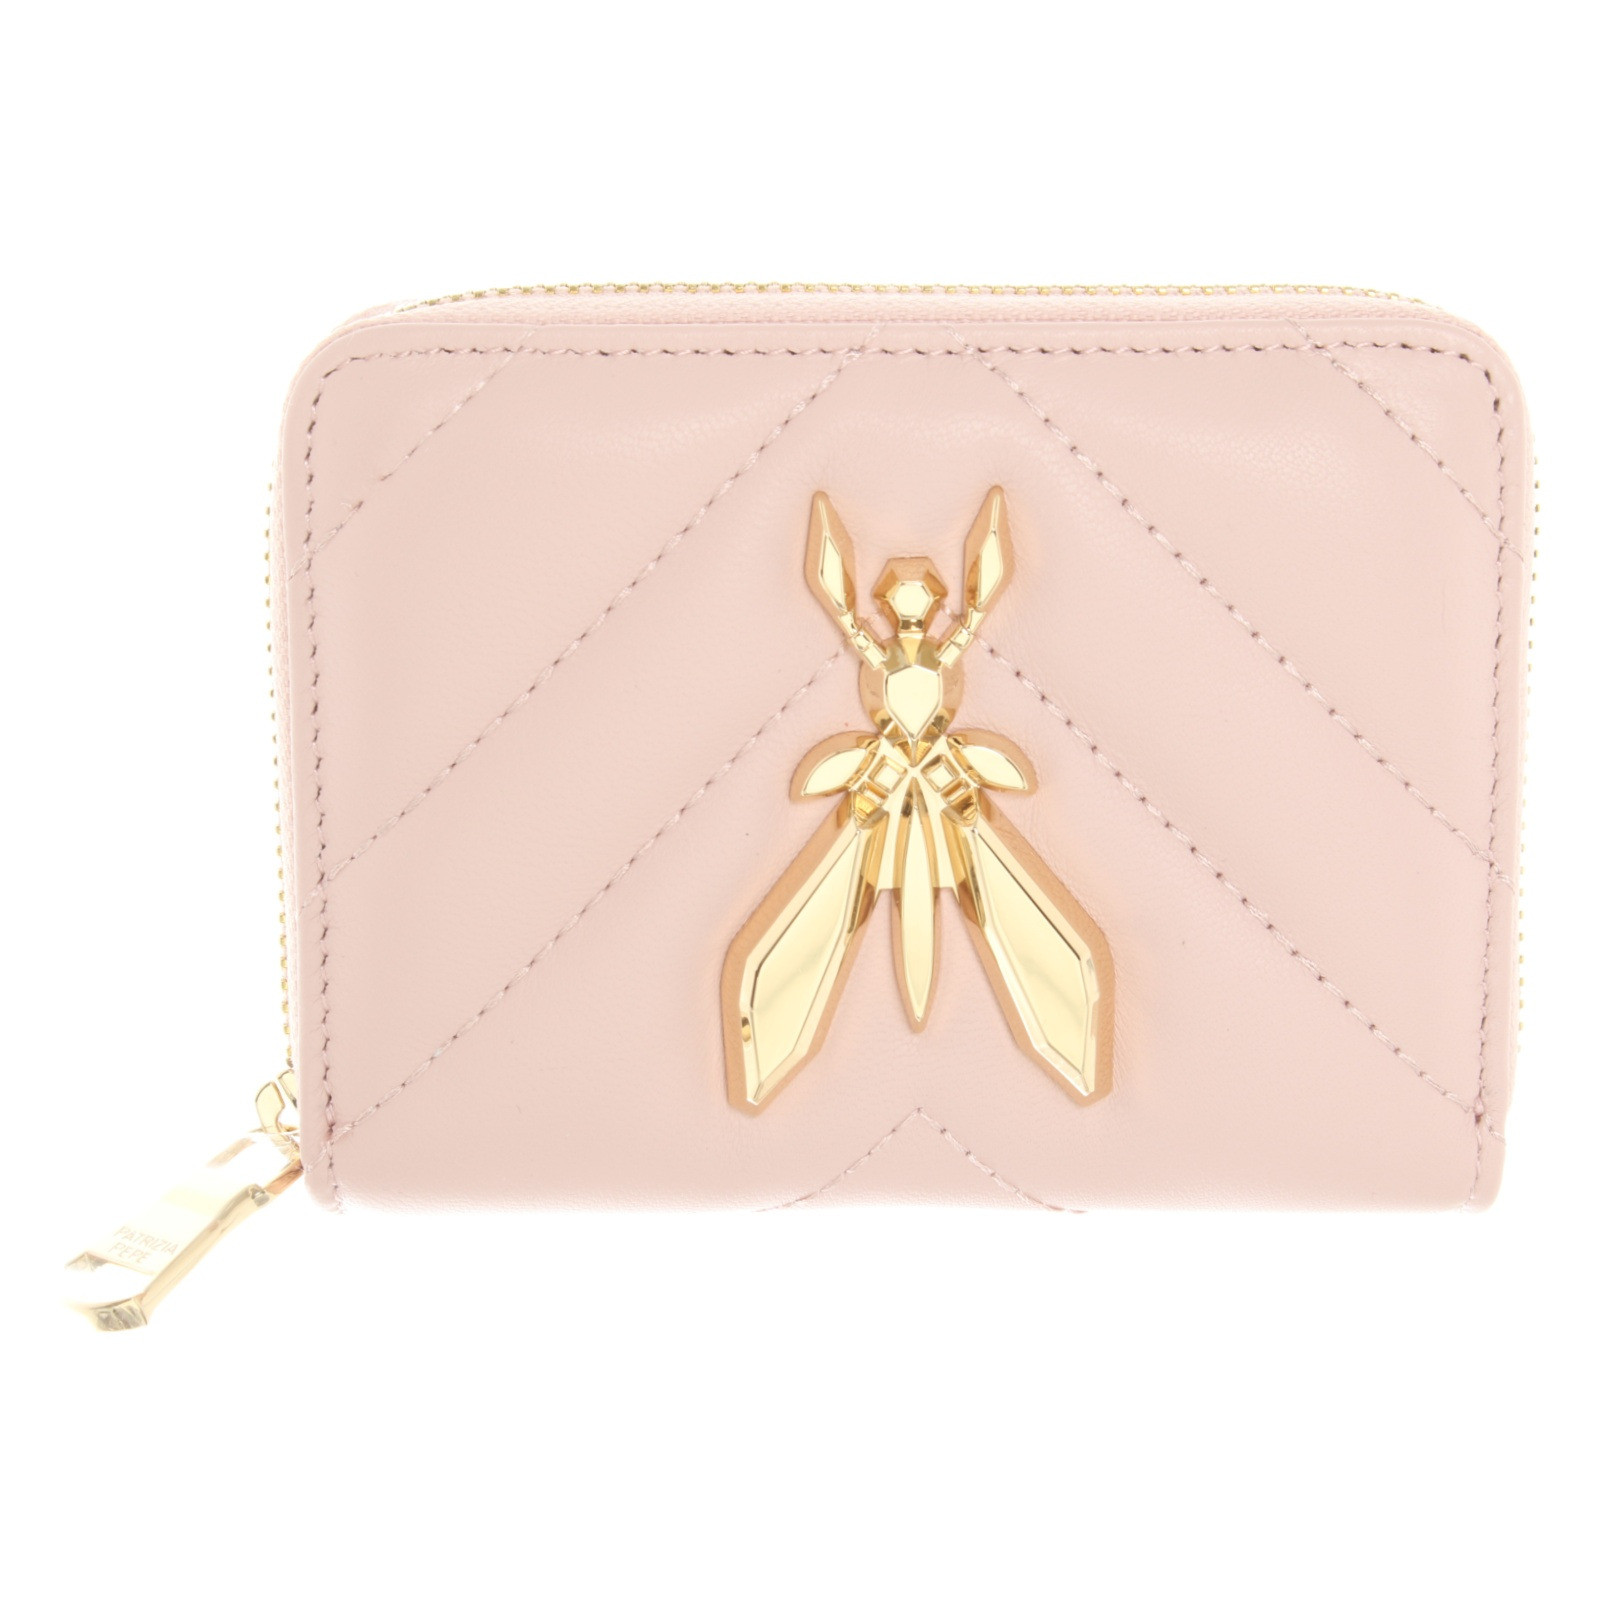 Patrizia Pepe Bag/Purse in Pink - Second Pepe Bag/Purse Leather in Pink buy used for 72€ (5929703)